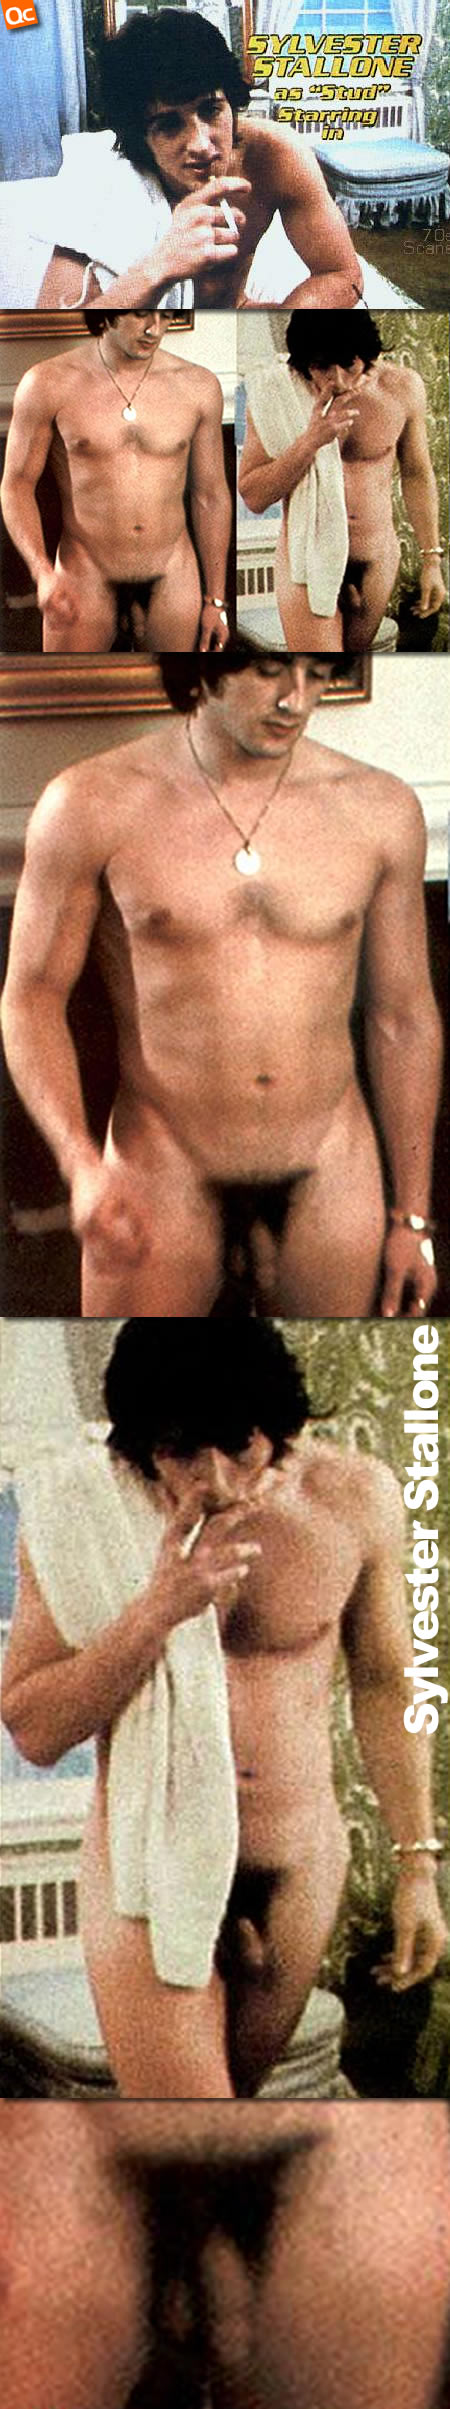 Sylvester Stallone Nude Shots - QueerClick